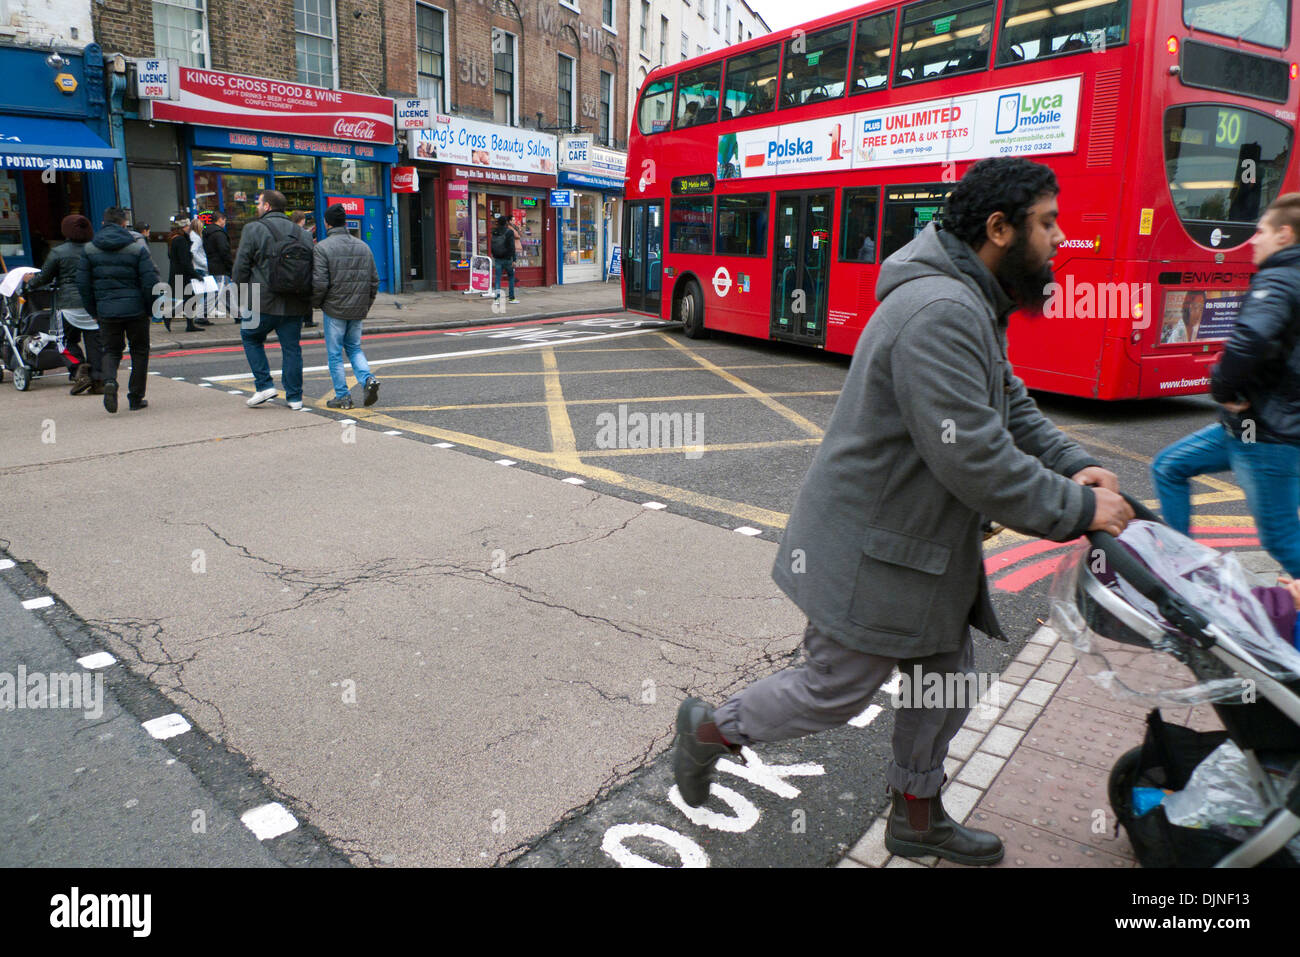 Pedestrians man pram crossing busy road Grays Inn Road with red double decker bus buses cars traffic in King's Cross area of London UK  KATHY DEWITT Stock Photo